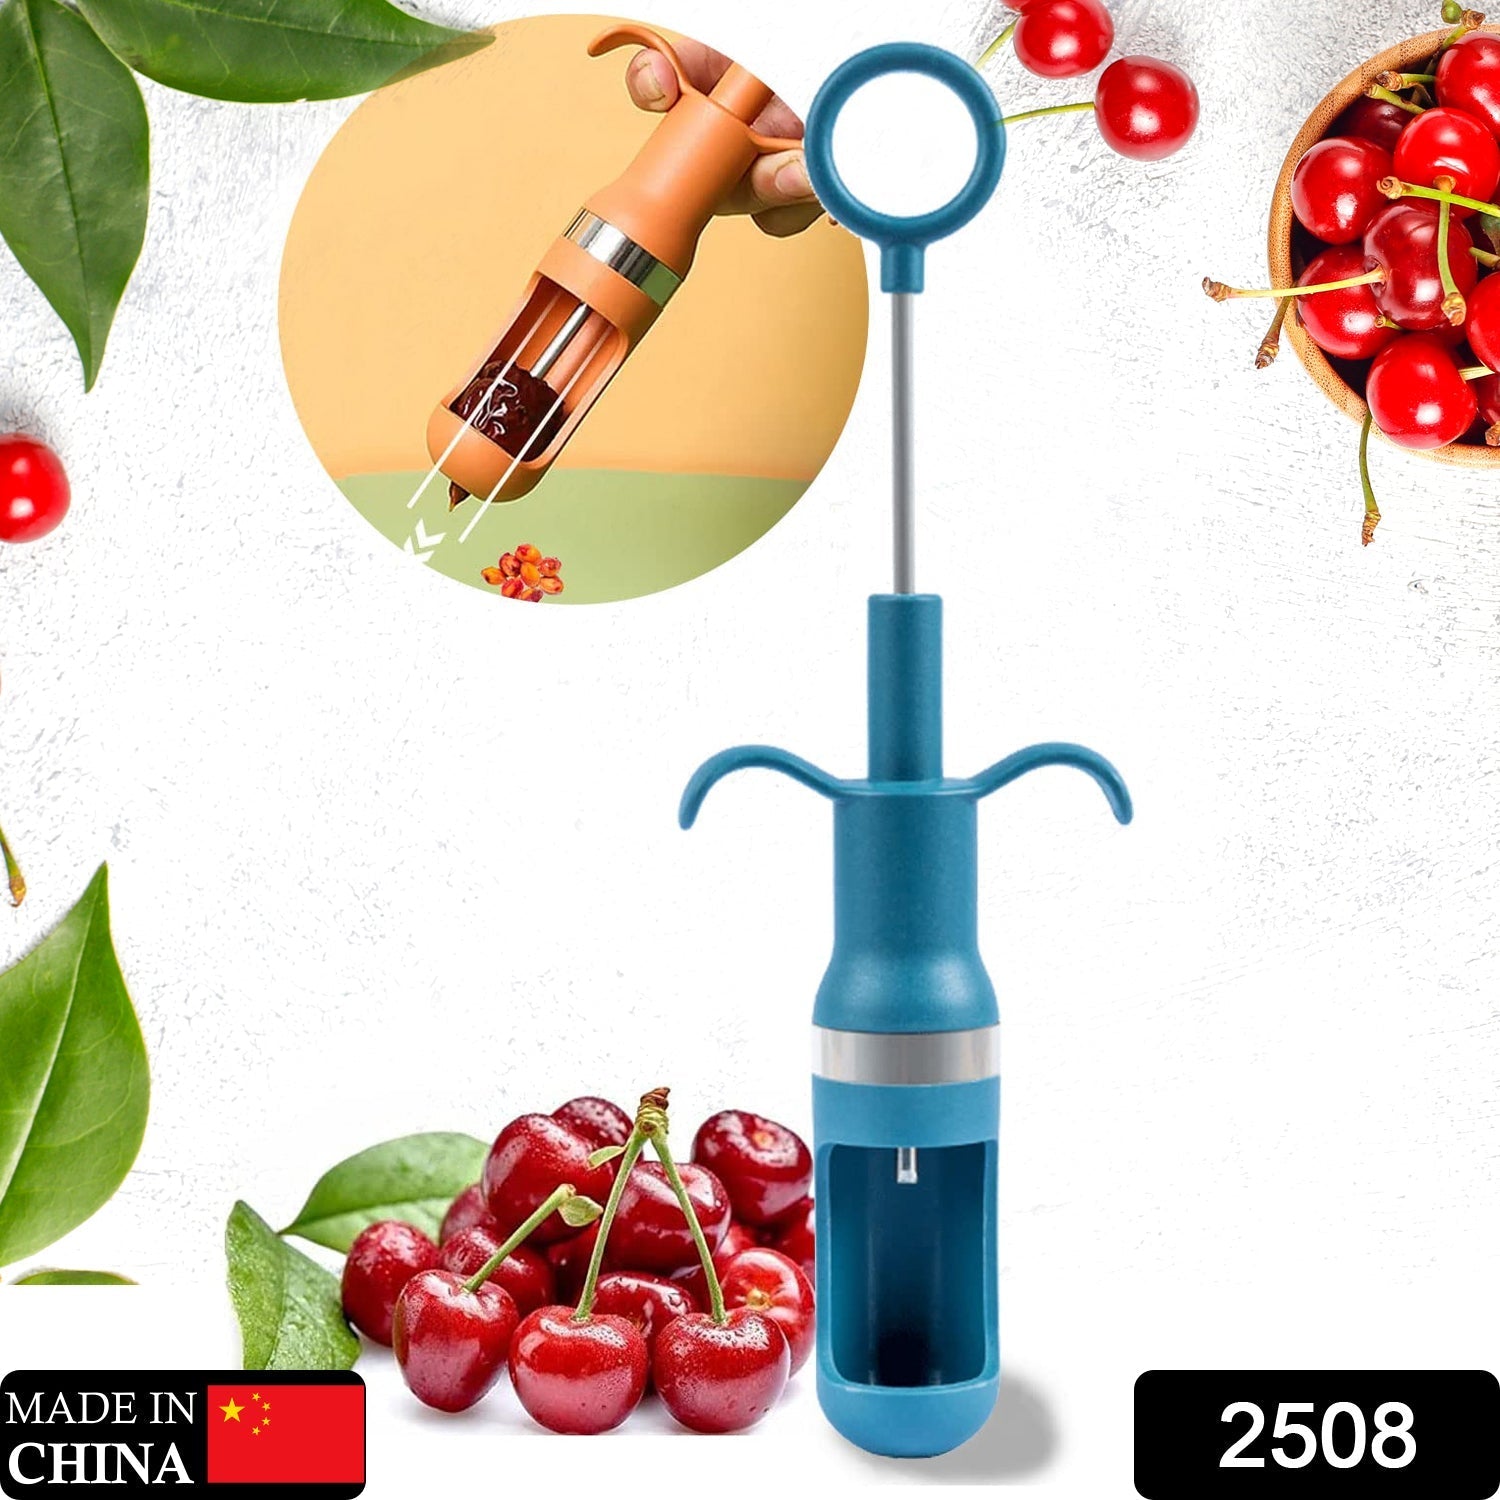 2508 Cherry Pitter Tool, One Hand Operation Cherry Corer Pitter Remover Tool Best, Cherry Pit Kitchen Tools for Cherries Jam Quick Removal Fruit Stones (1pc). DeoDap